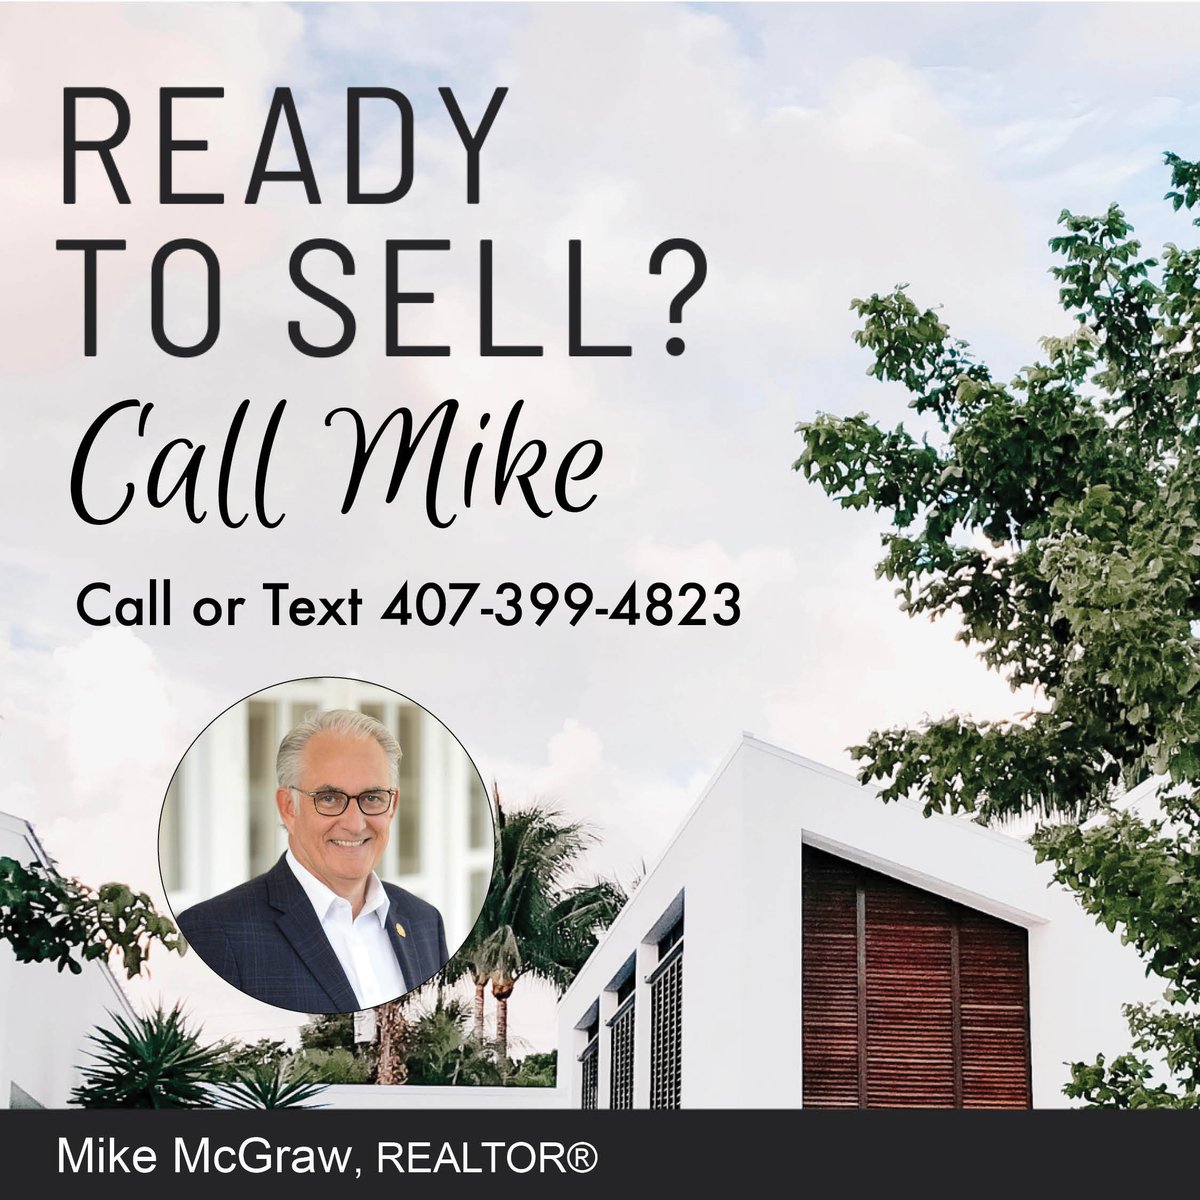 Ready to sell your home? Call or text me at 407-399-4823. I'm ready to get to work for you.

#LPTRealty #LPTRealtyProud #Orlandorealestate #Apopkarealestate #RealEstate #Realtor